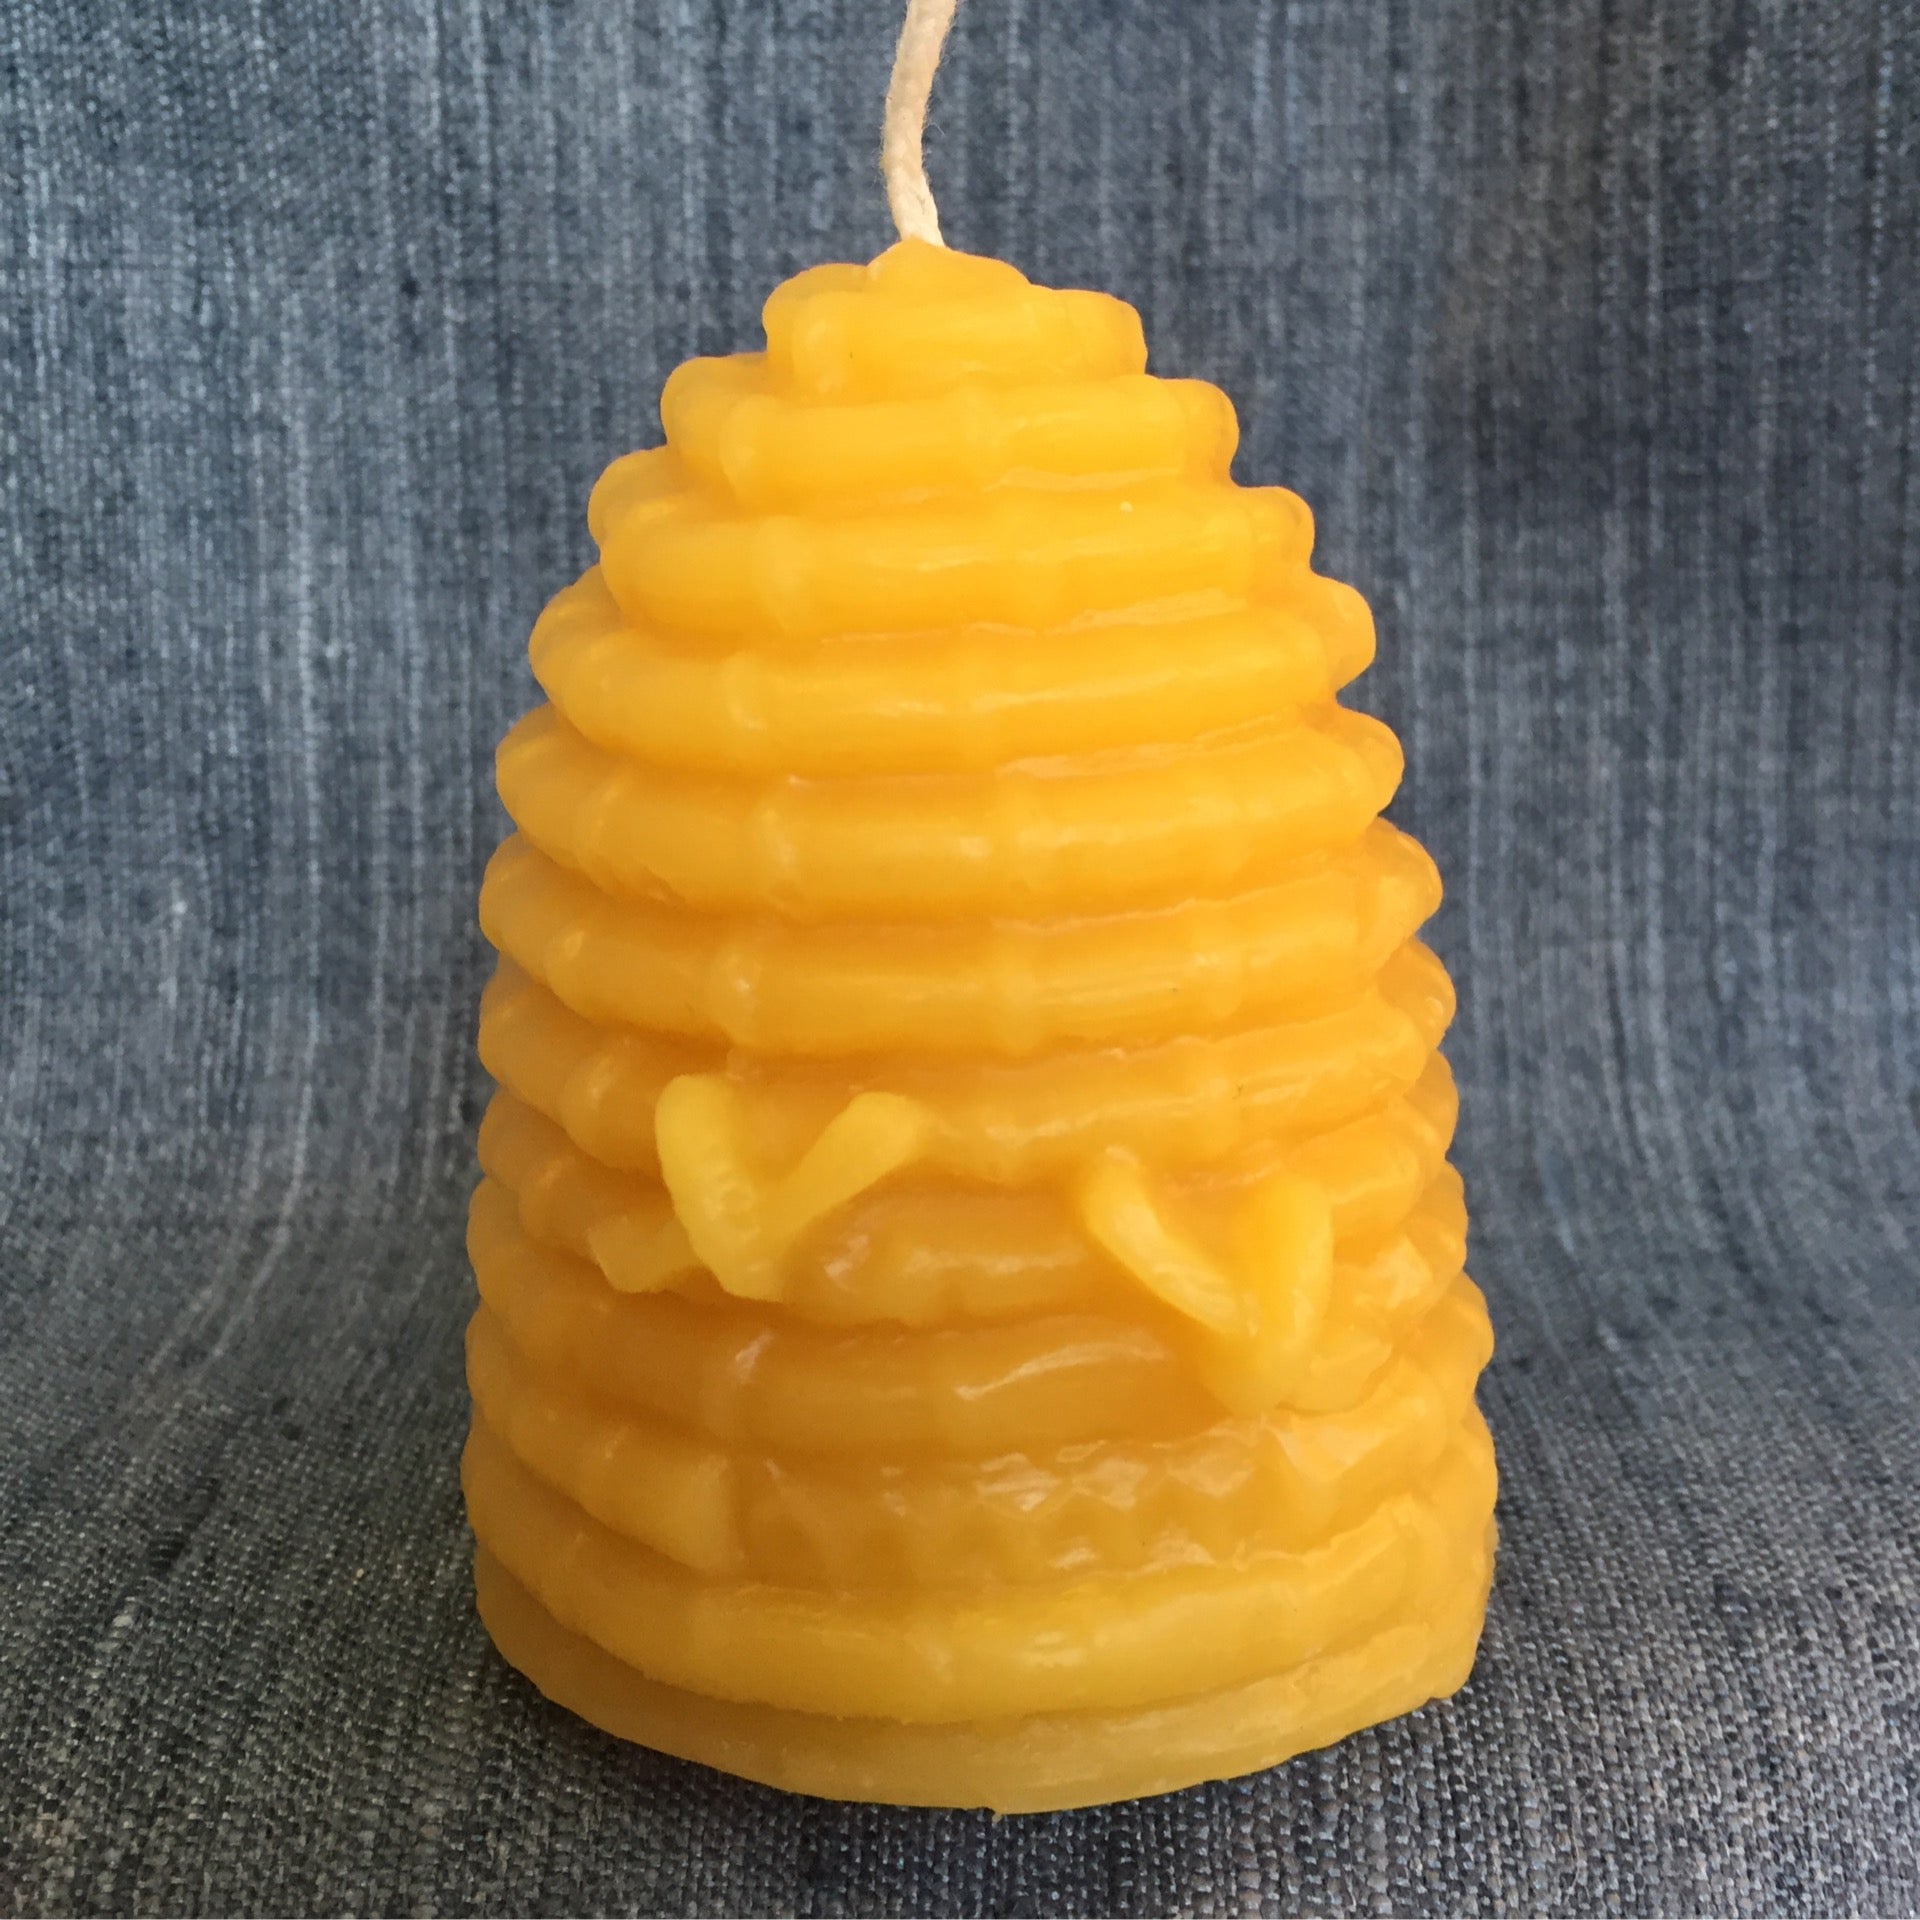 Set of 15 Beeswax Candles- Hive shaped with bee, votive size — Honeyrun Farm